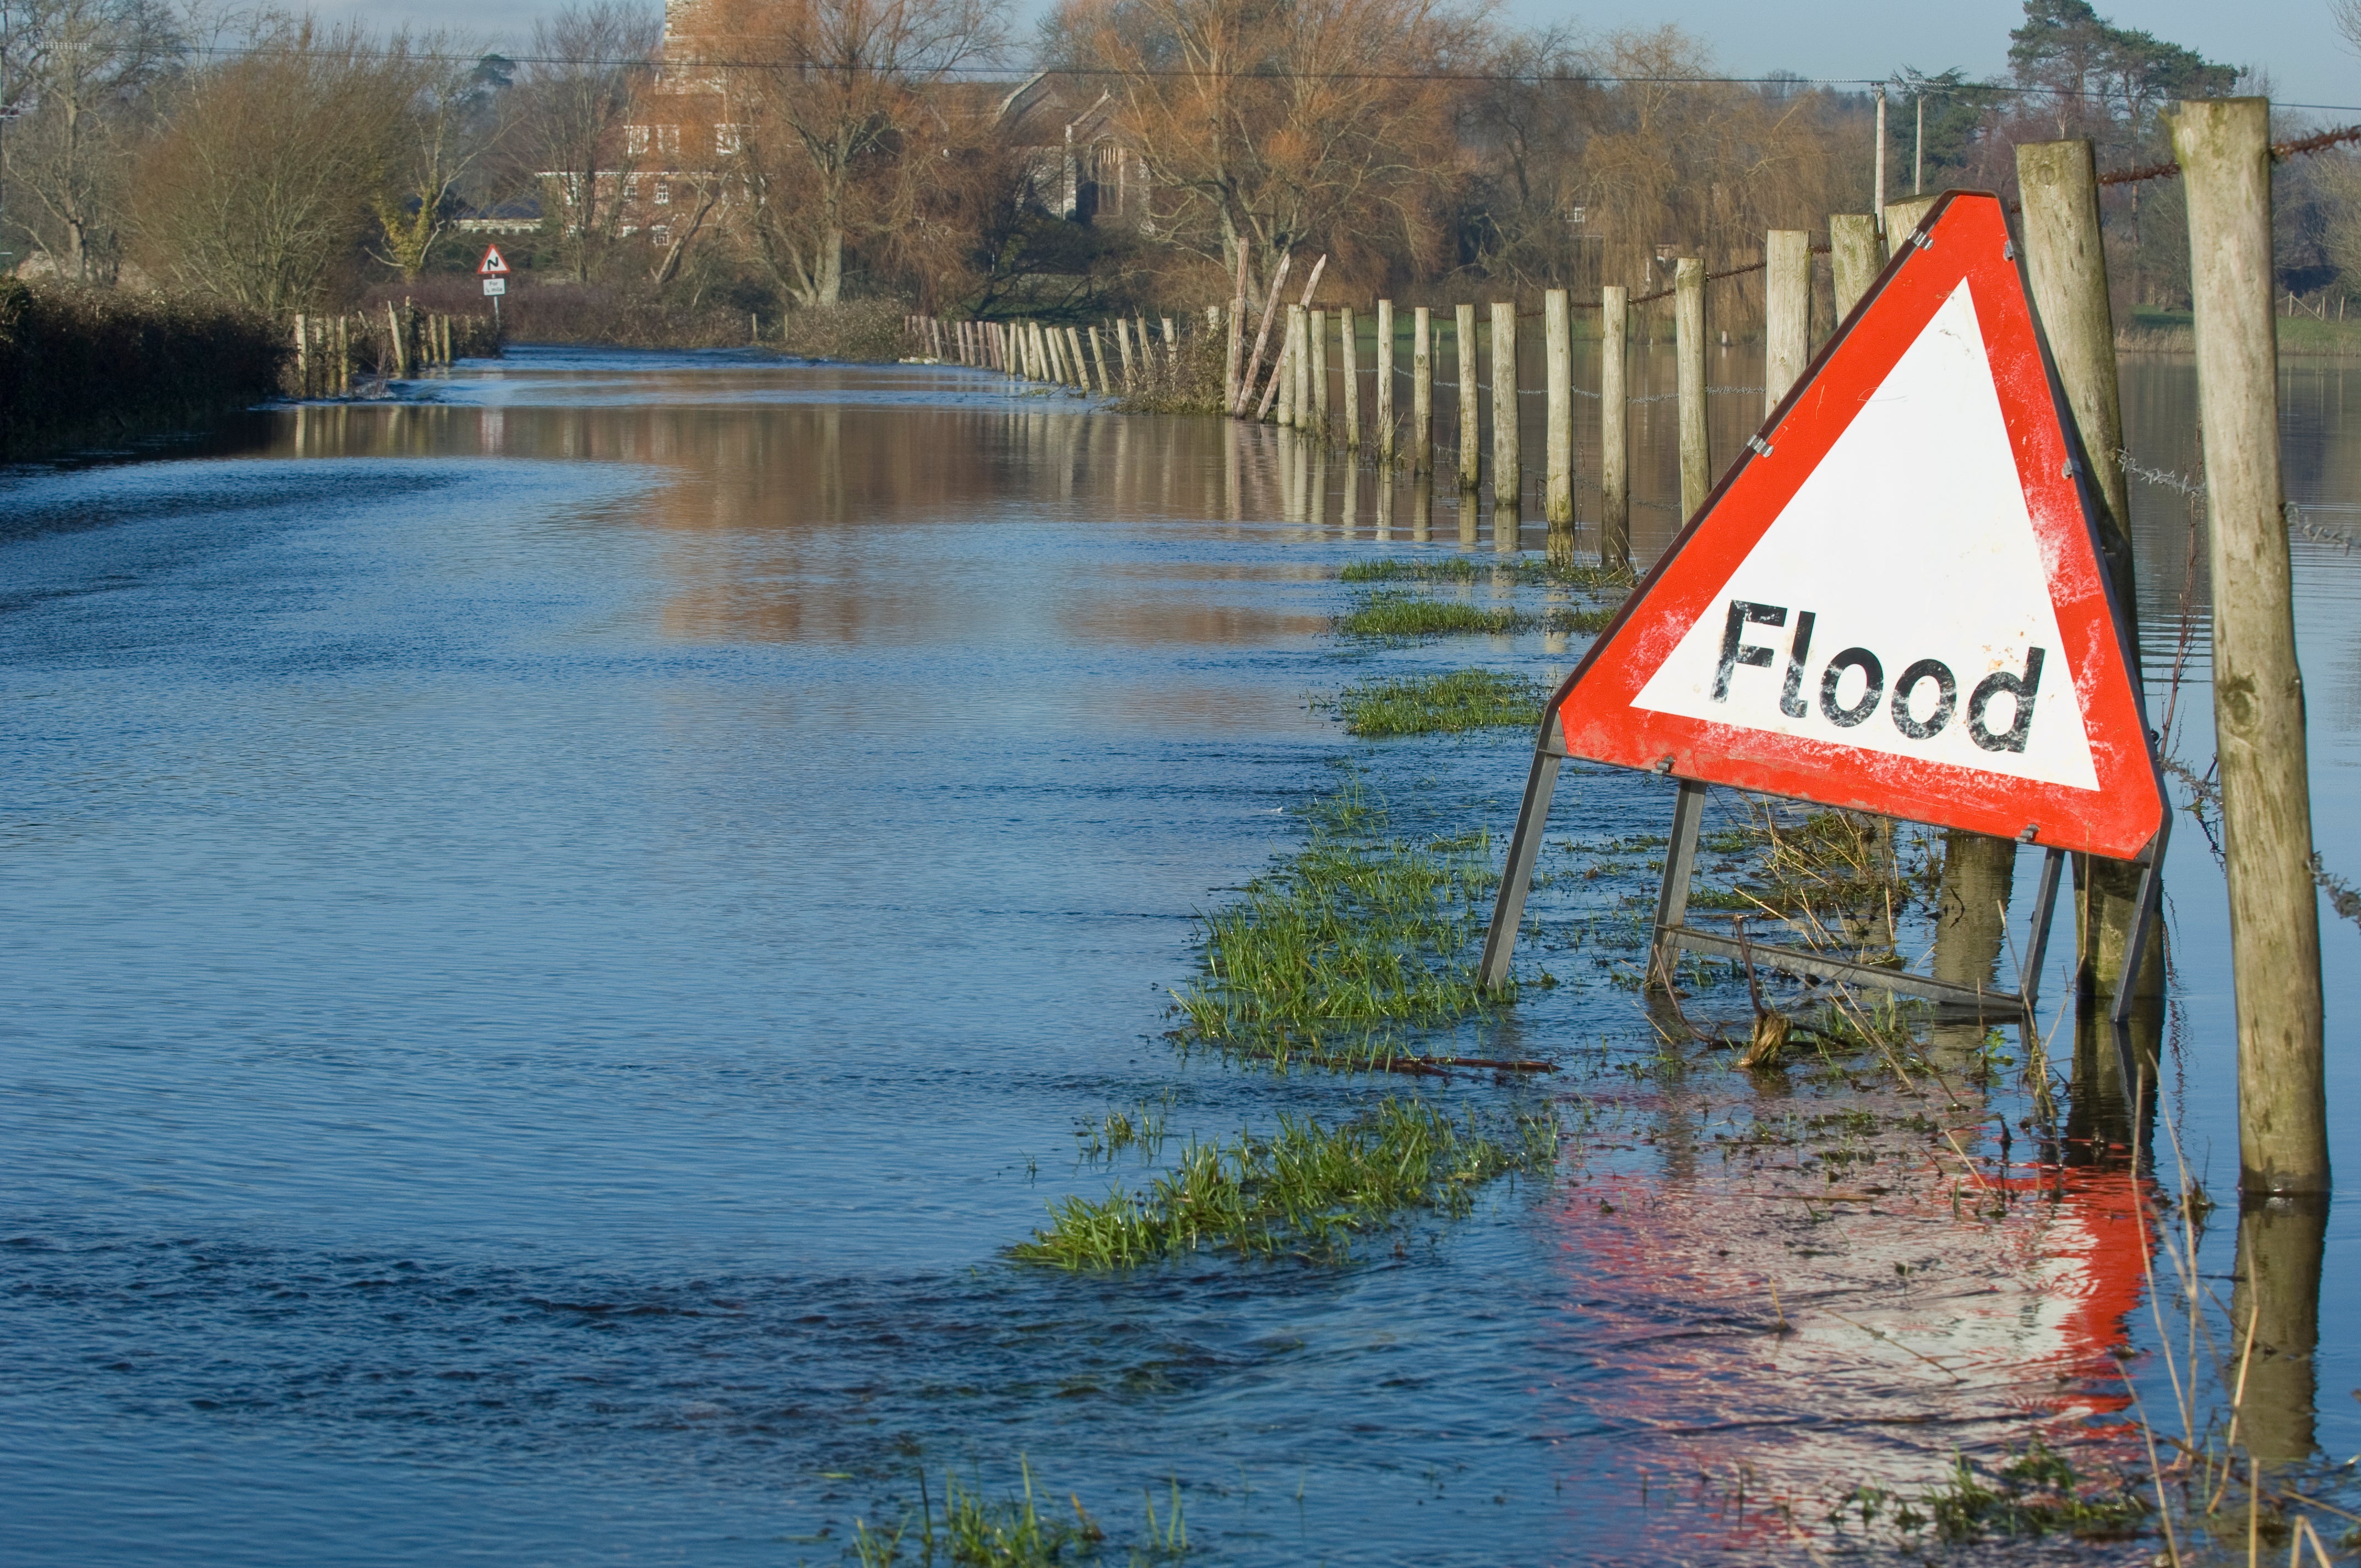 Flood warnings are in place for areas in England, with heavy rain expected across the country